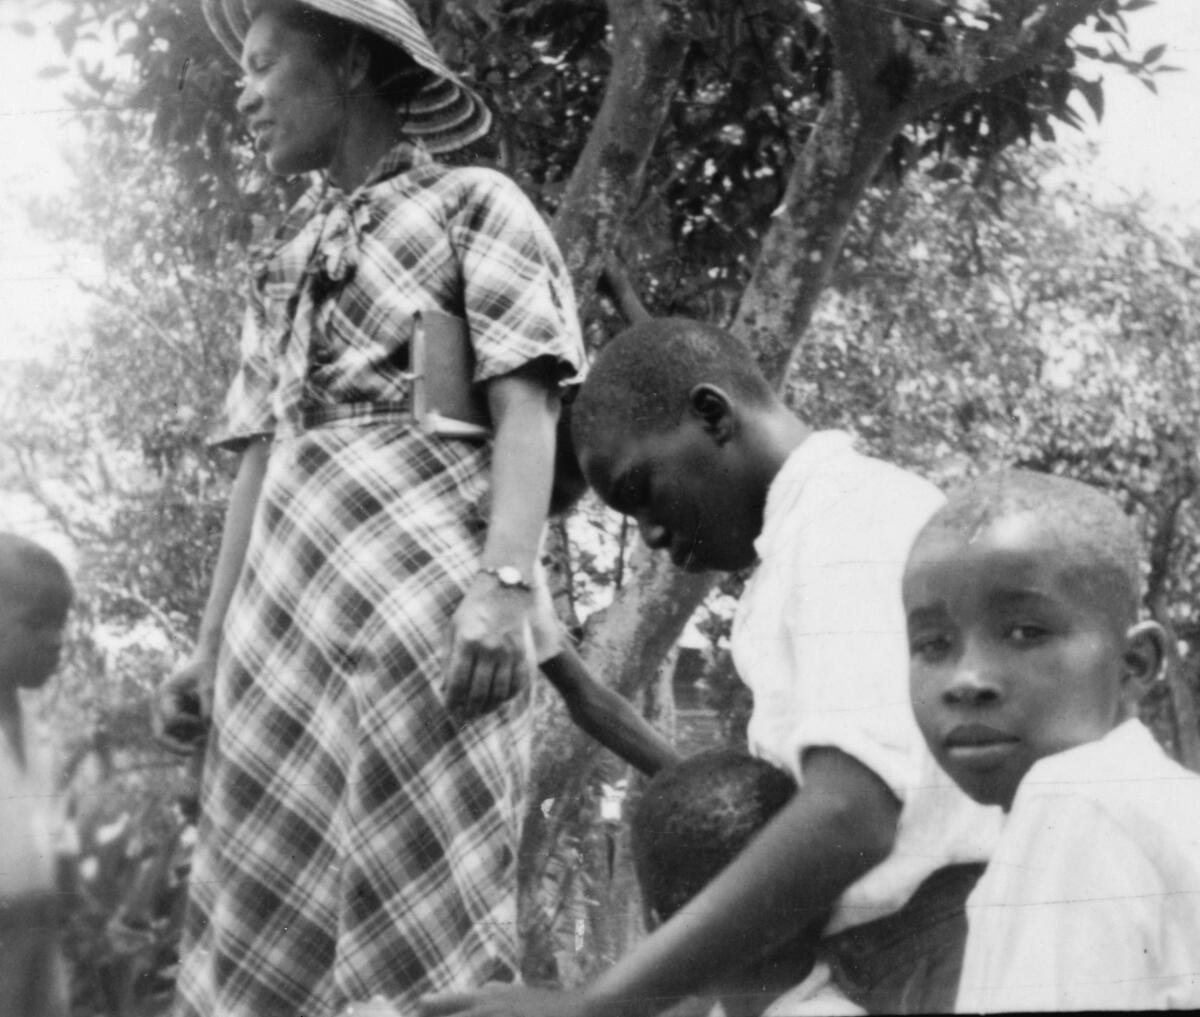 Hurston plays with children in her hometown of Eatonville, Fla., during a recording expedition in June 1935.